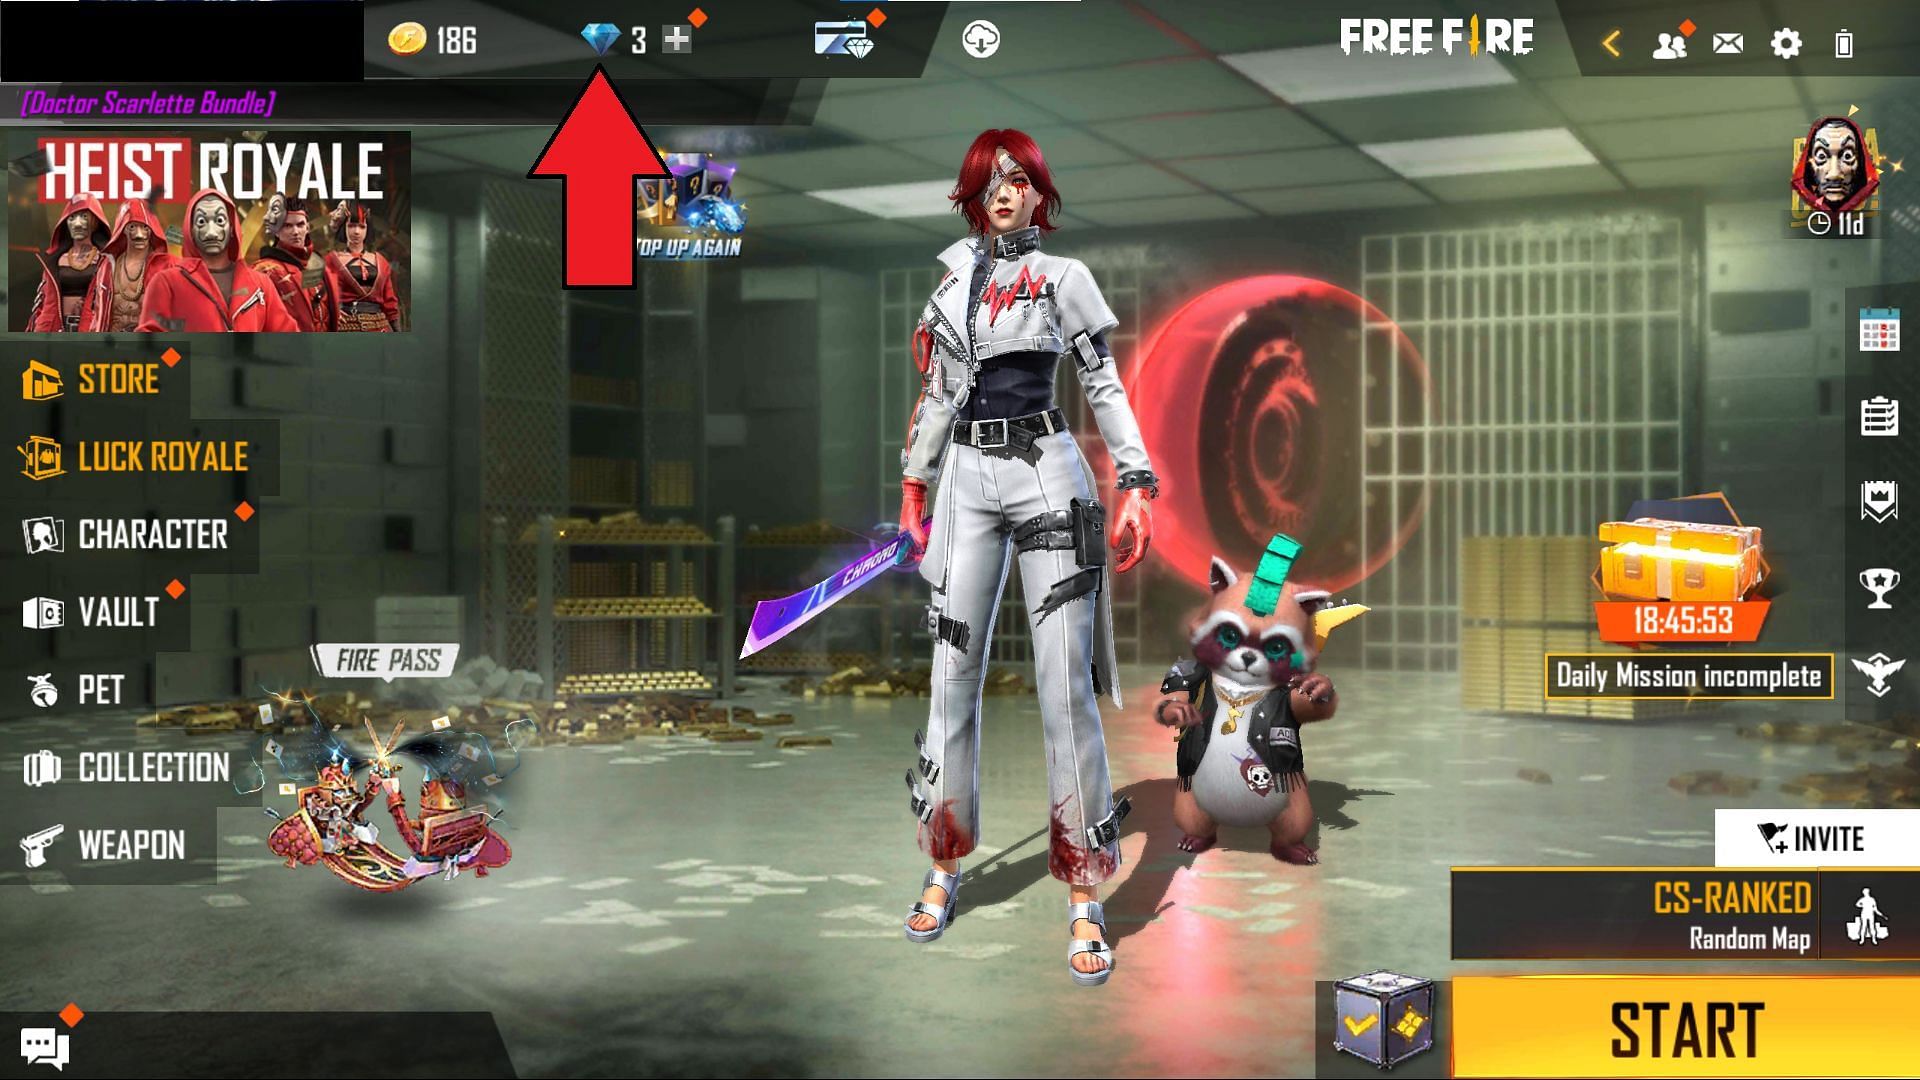 Press here to visit the top-up center (Image via Free Fire)